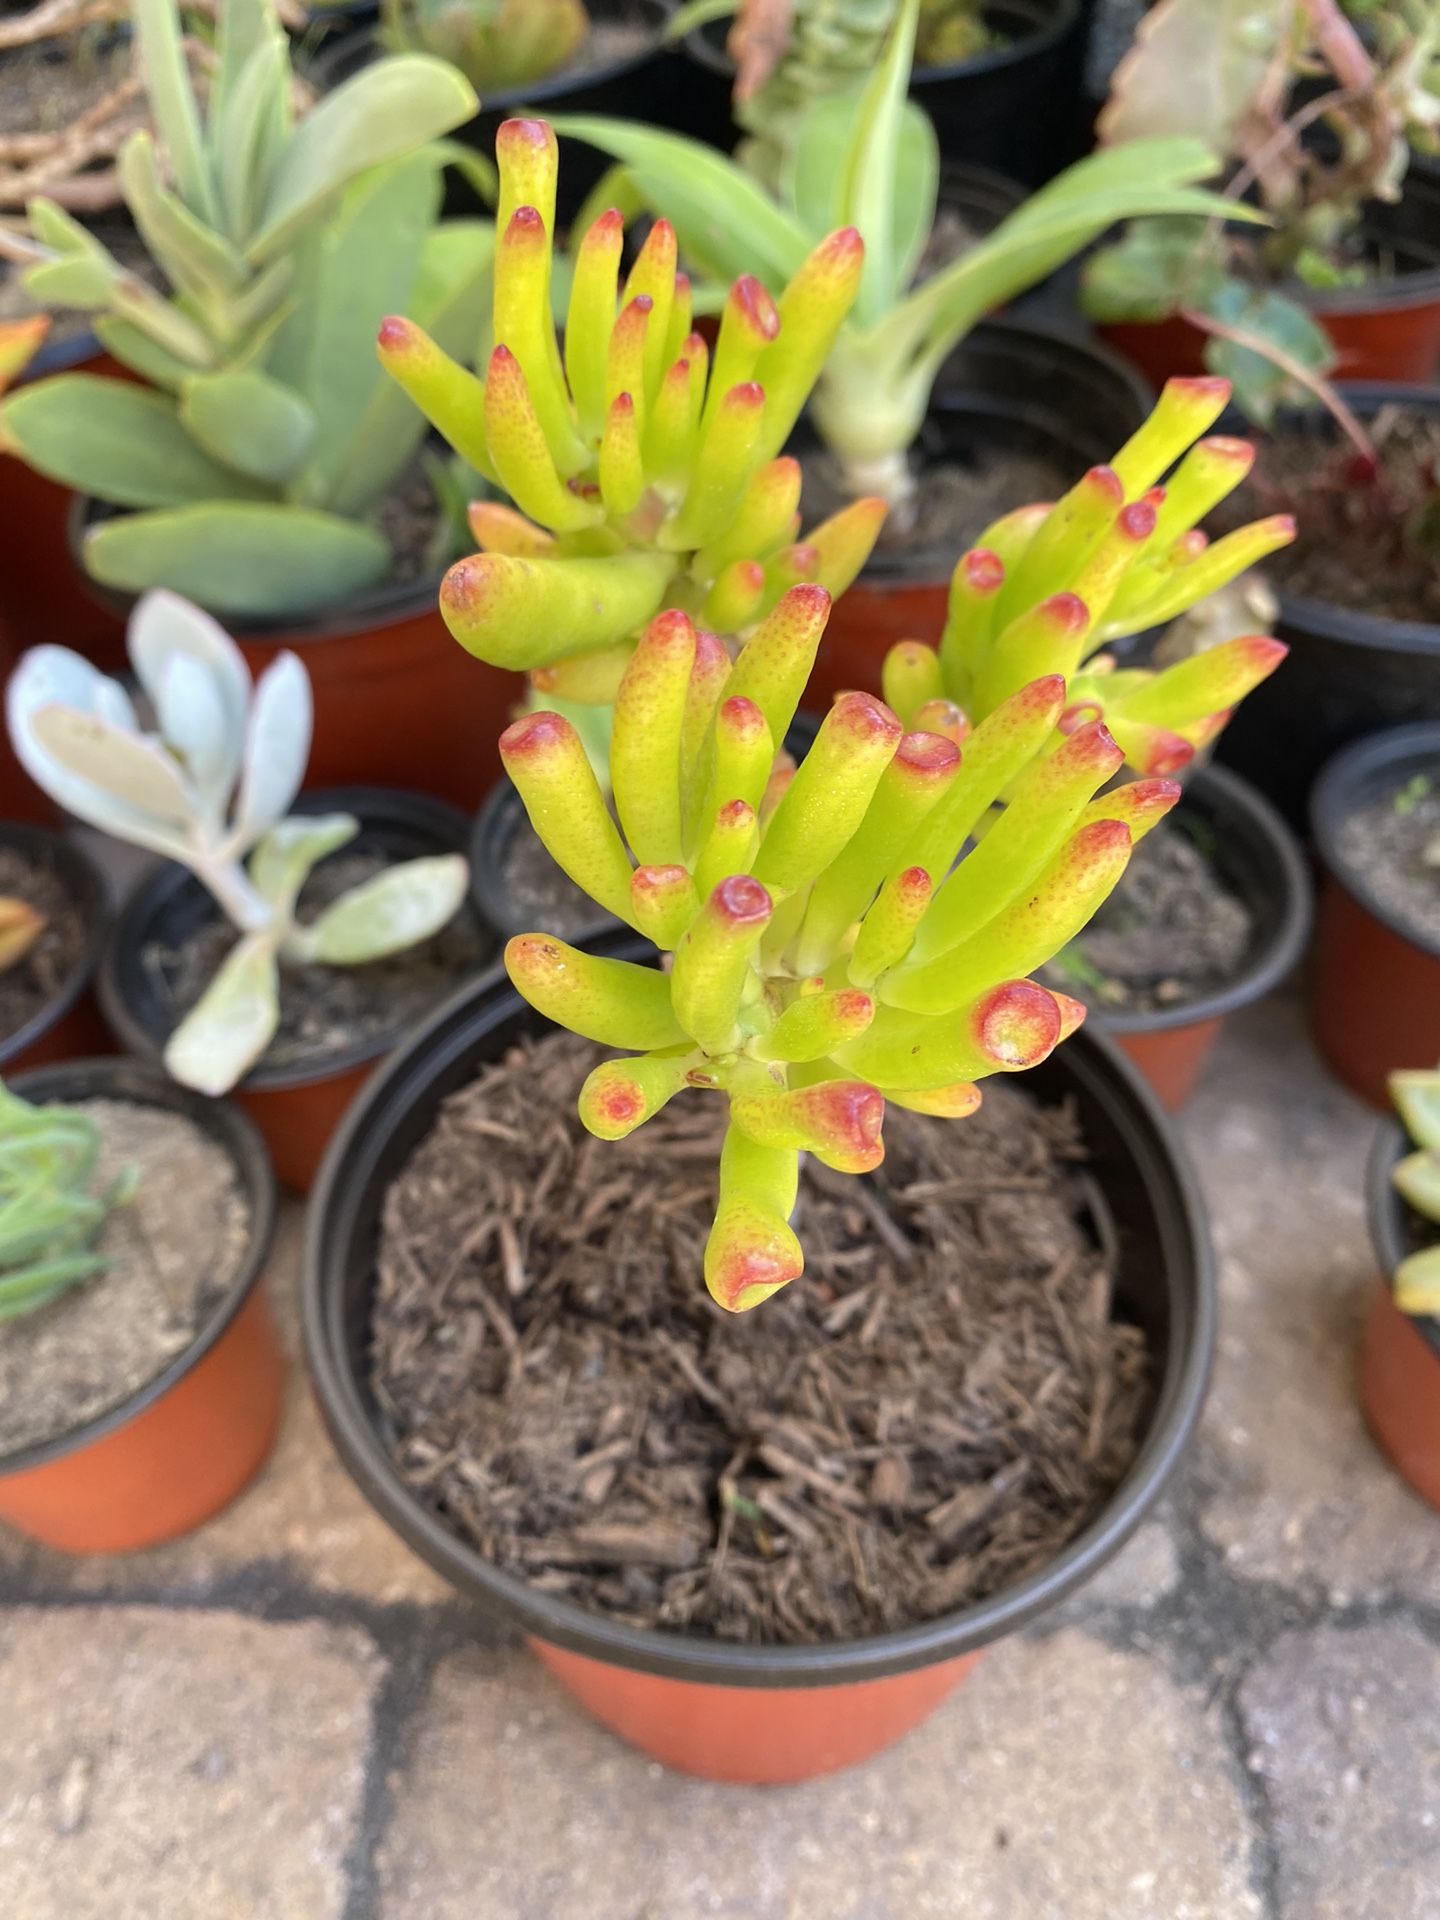 6 Inch Pot Succulent Plant - Jelly Beam Sedum Rubrotictum - rotted starter ready to plant  